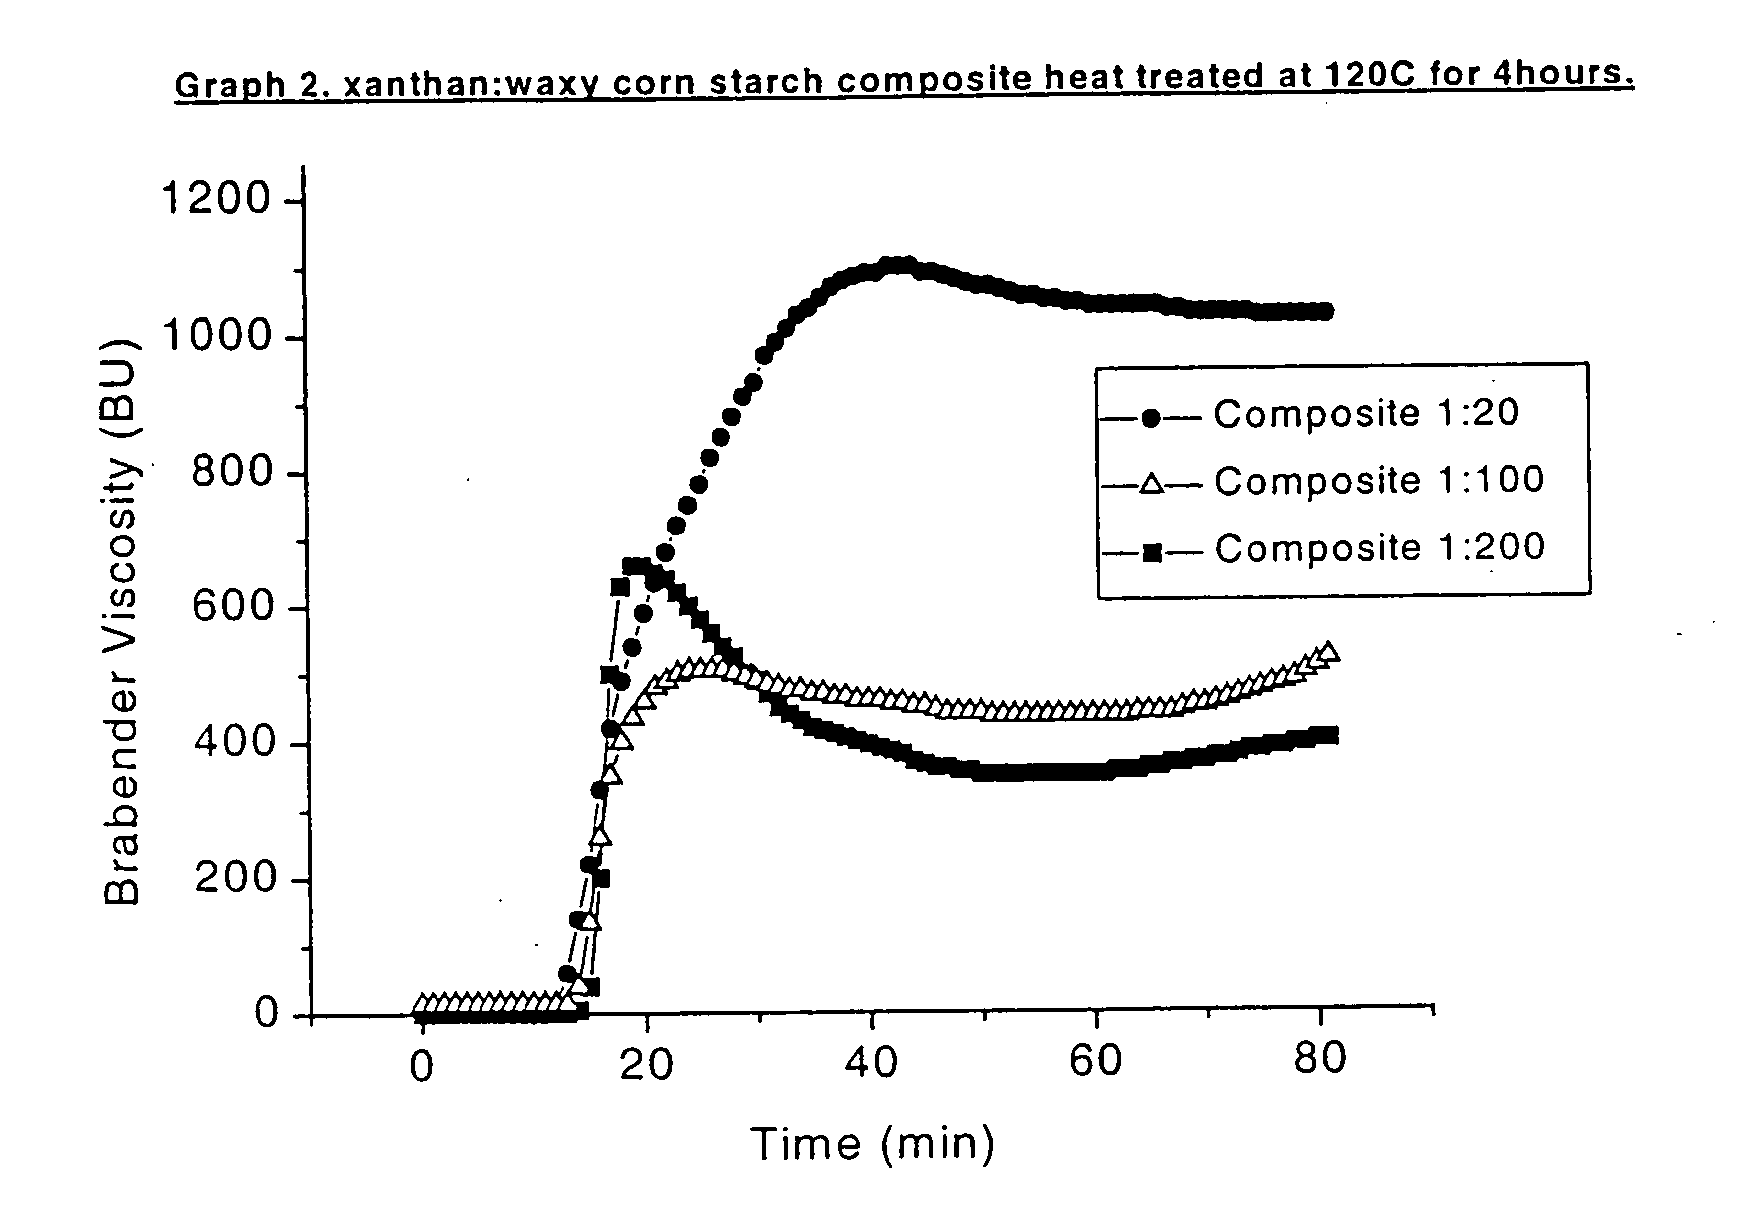 Starch/carboxylated polymer composites